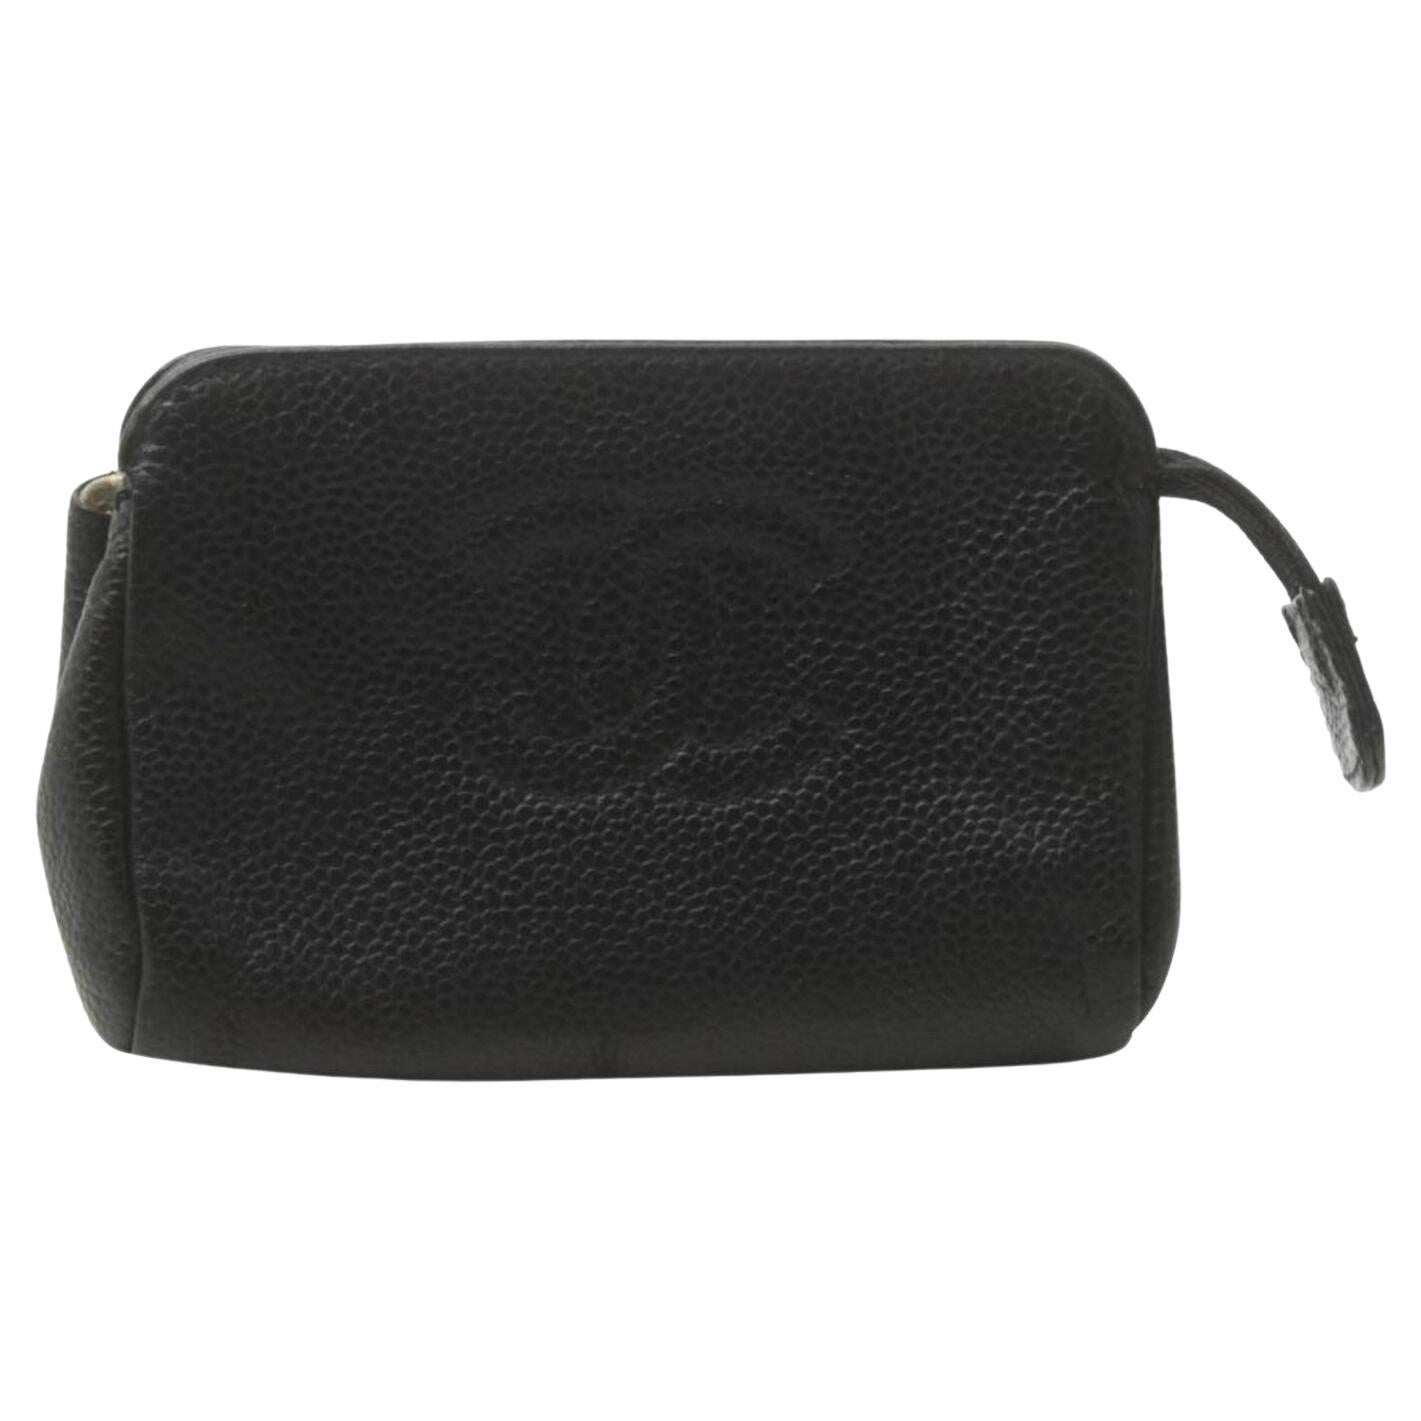 Discover more than 93 chanel cosmetic makeup bag latest - esthdonghoadian